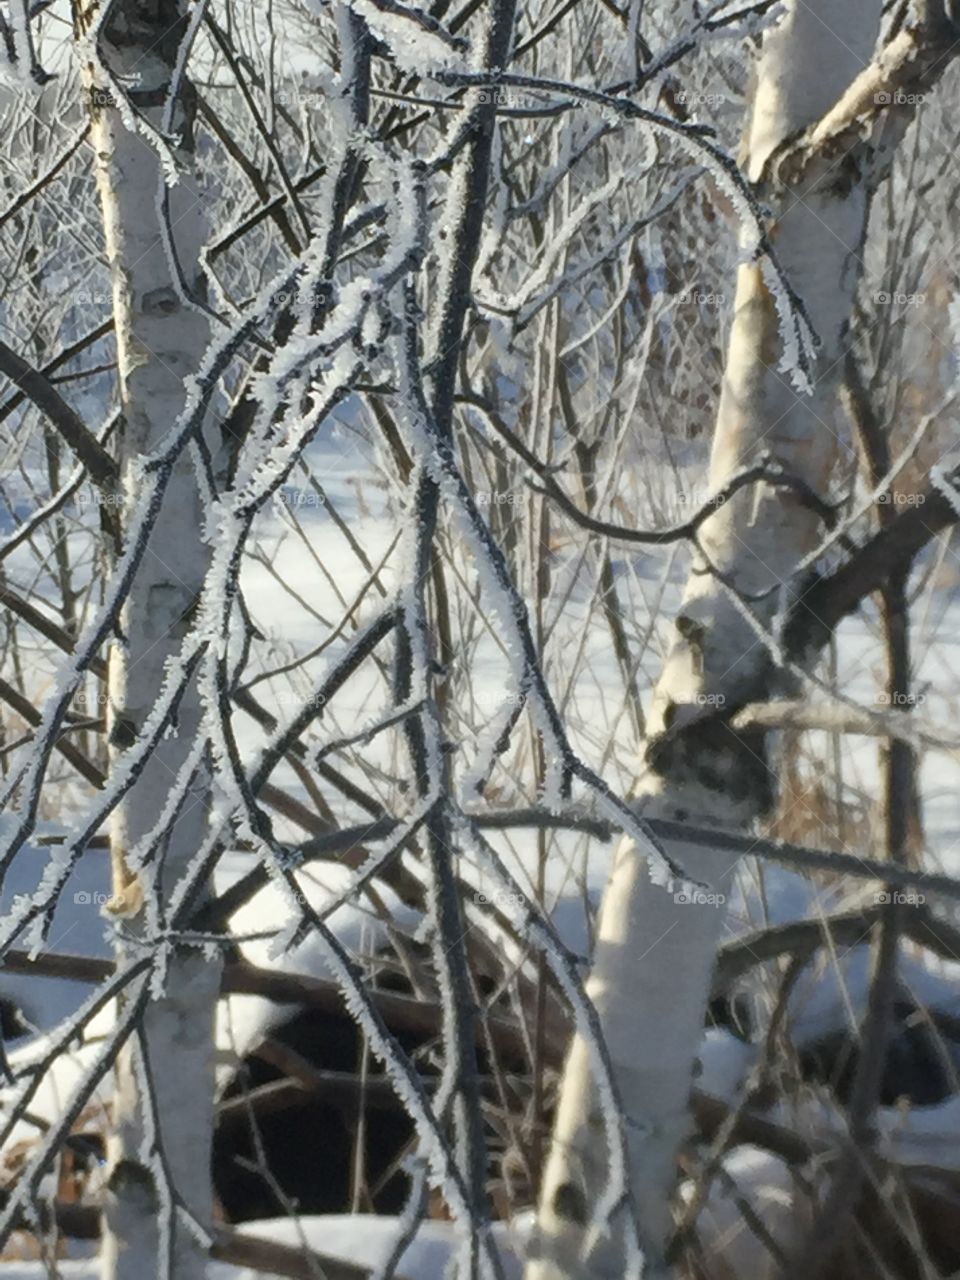 White on white heavy frost dancing like a little jagged Pieces of glass nature is a wonderful thing so much beauty around us